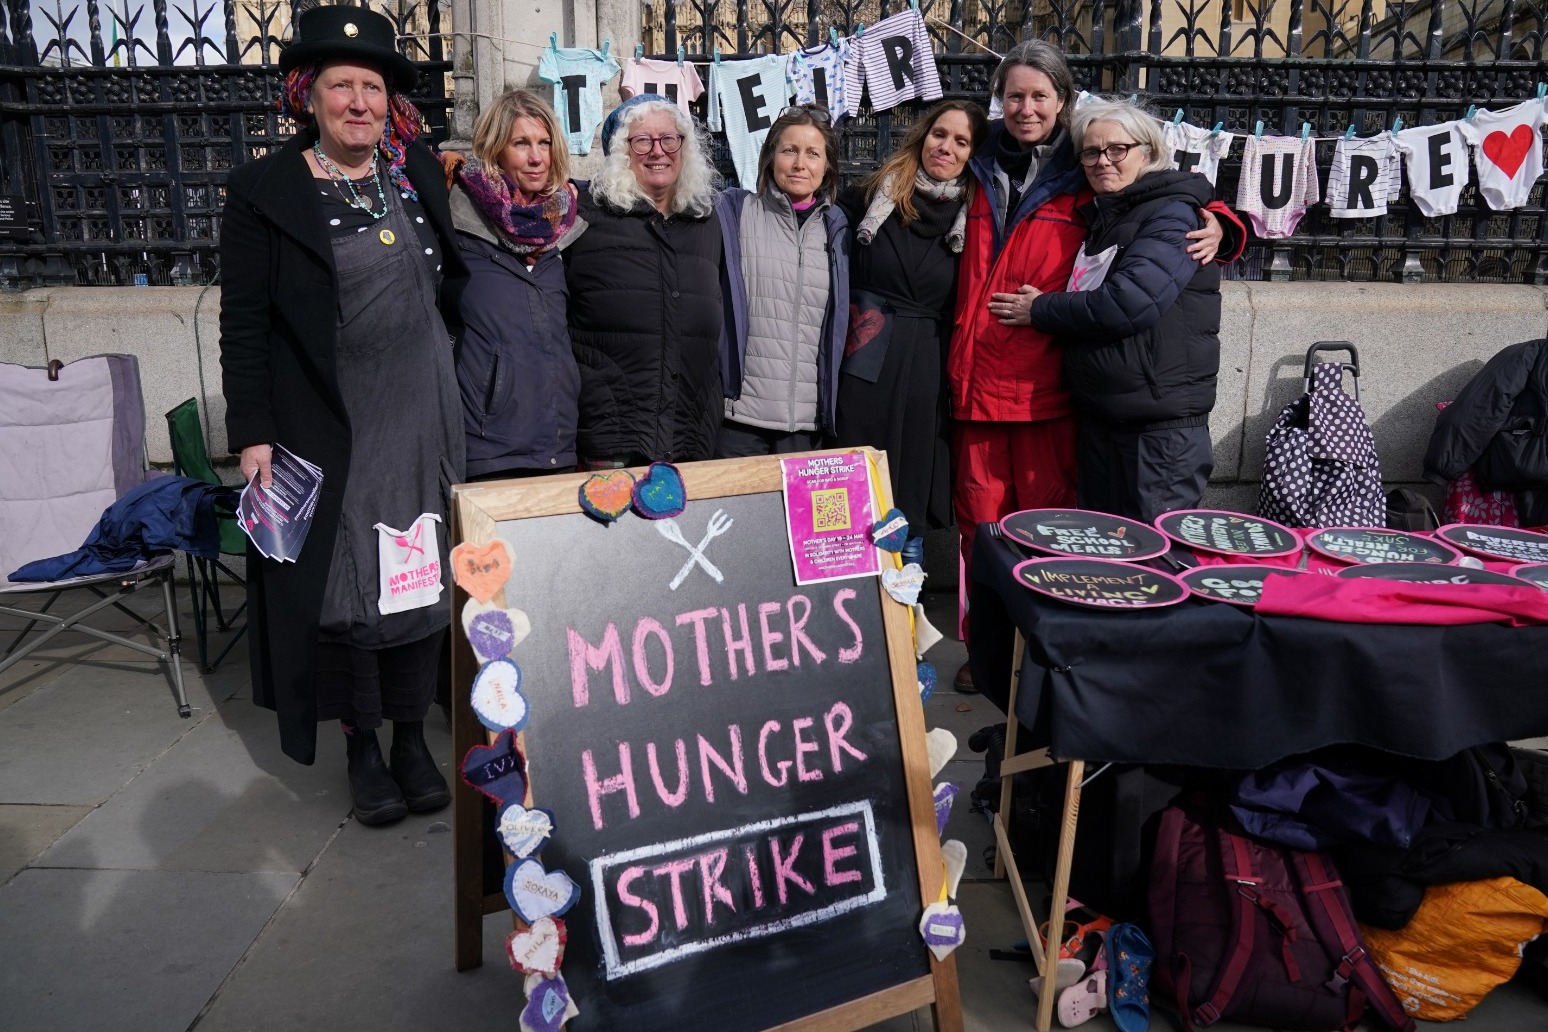 Mothers staging hunger strike at Parliament 